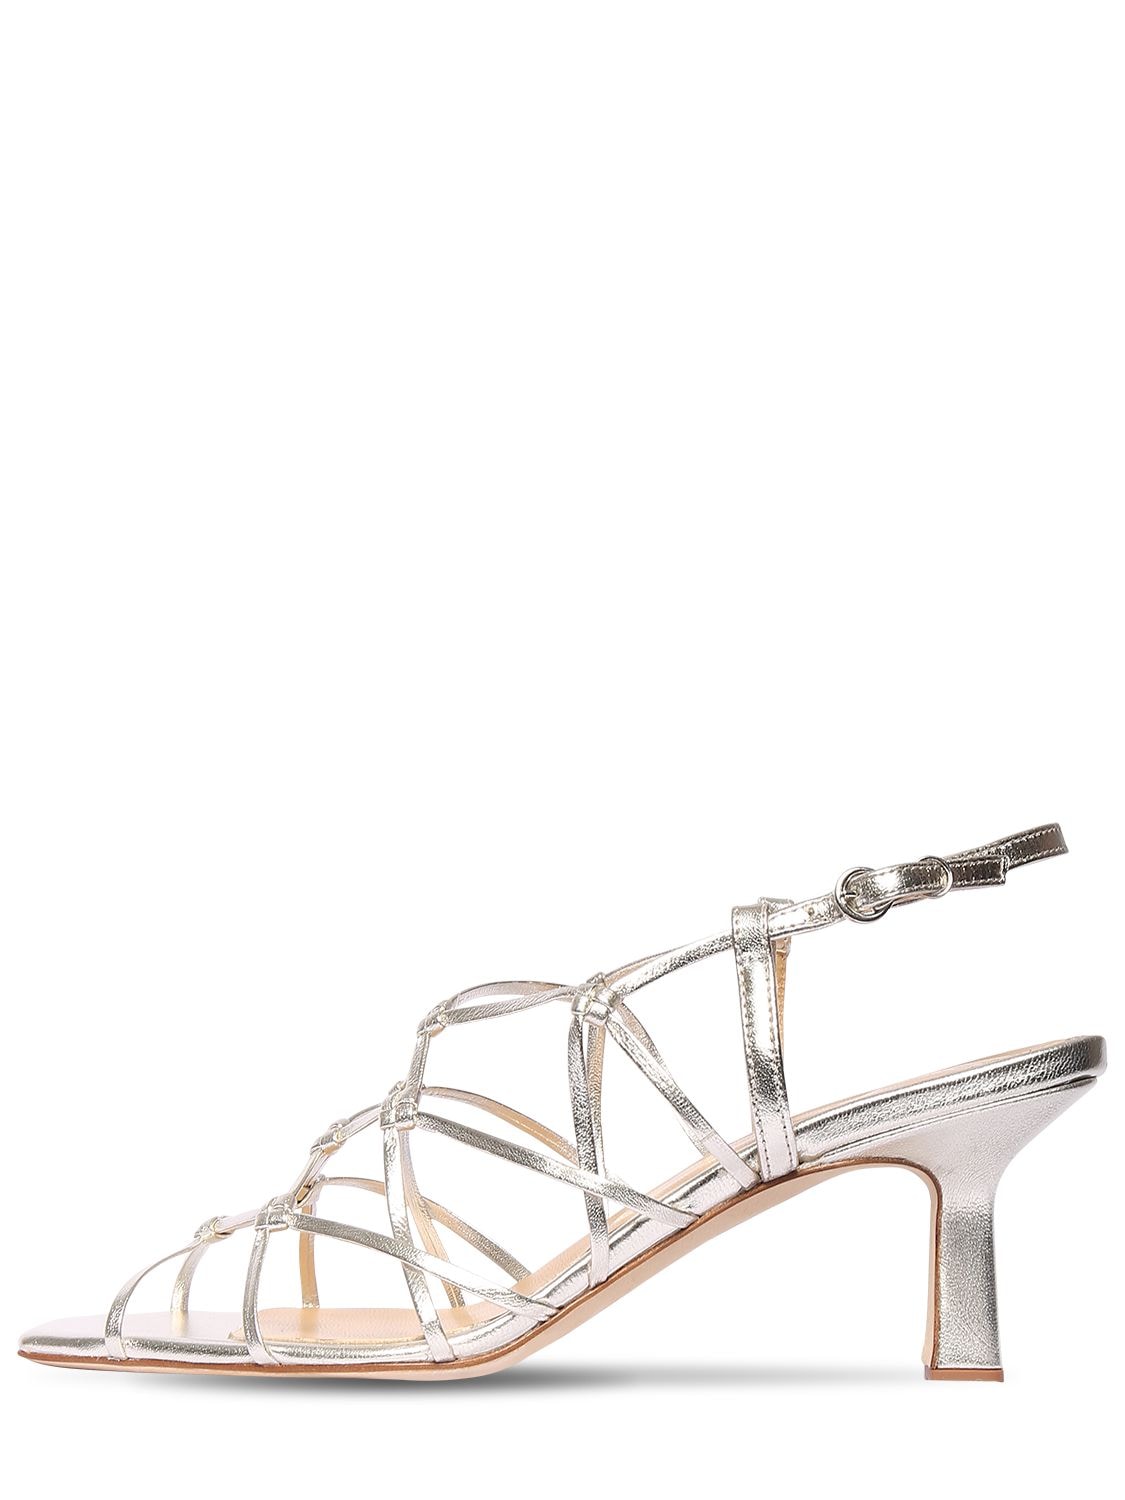 Aeyde 65mm Celia Metallic Leather Sandals In Silver